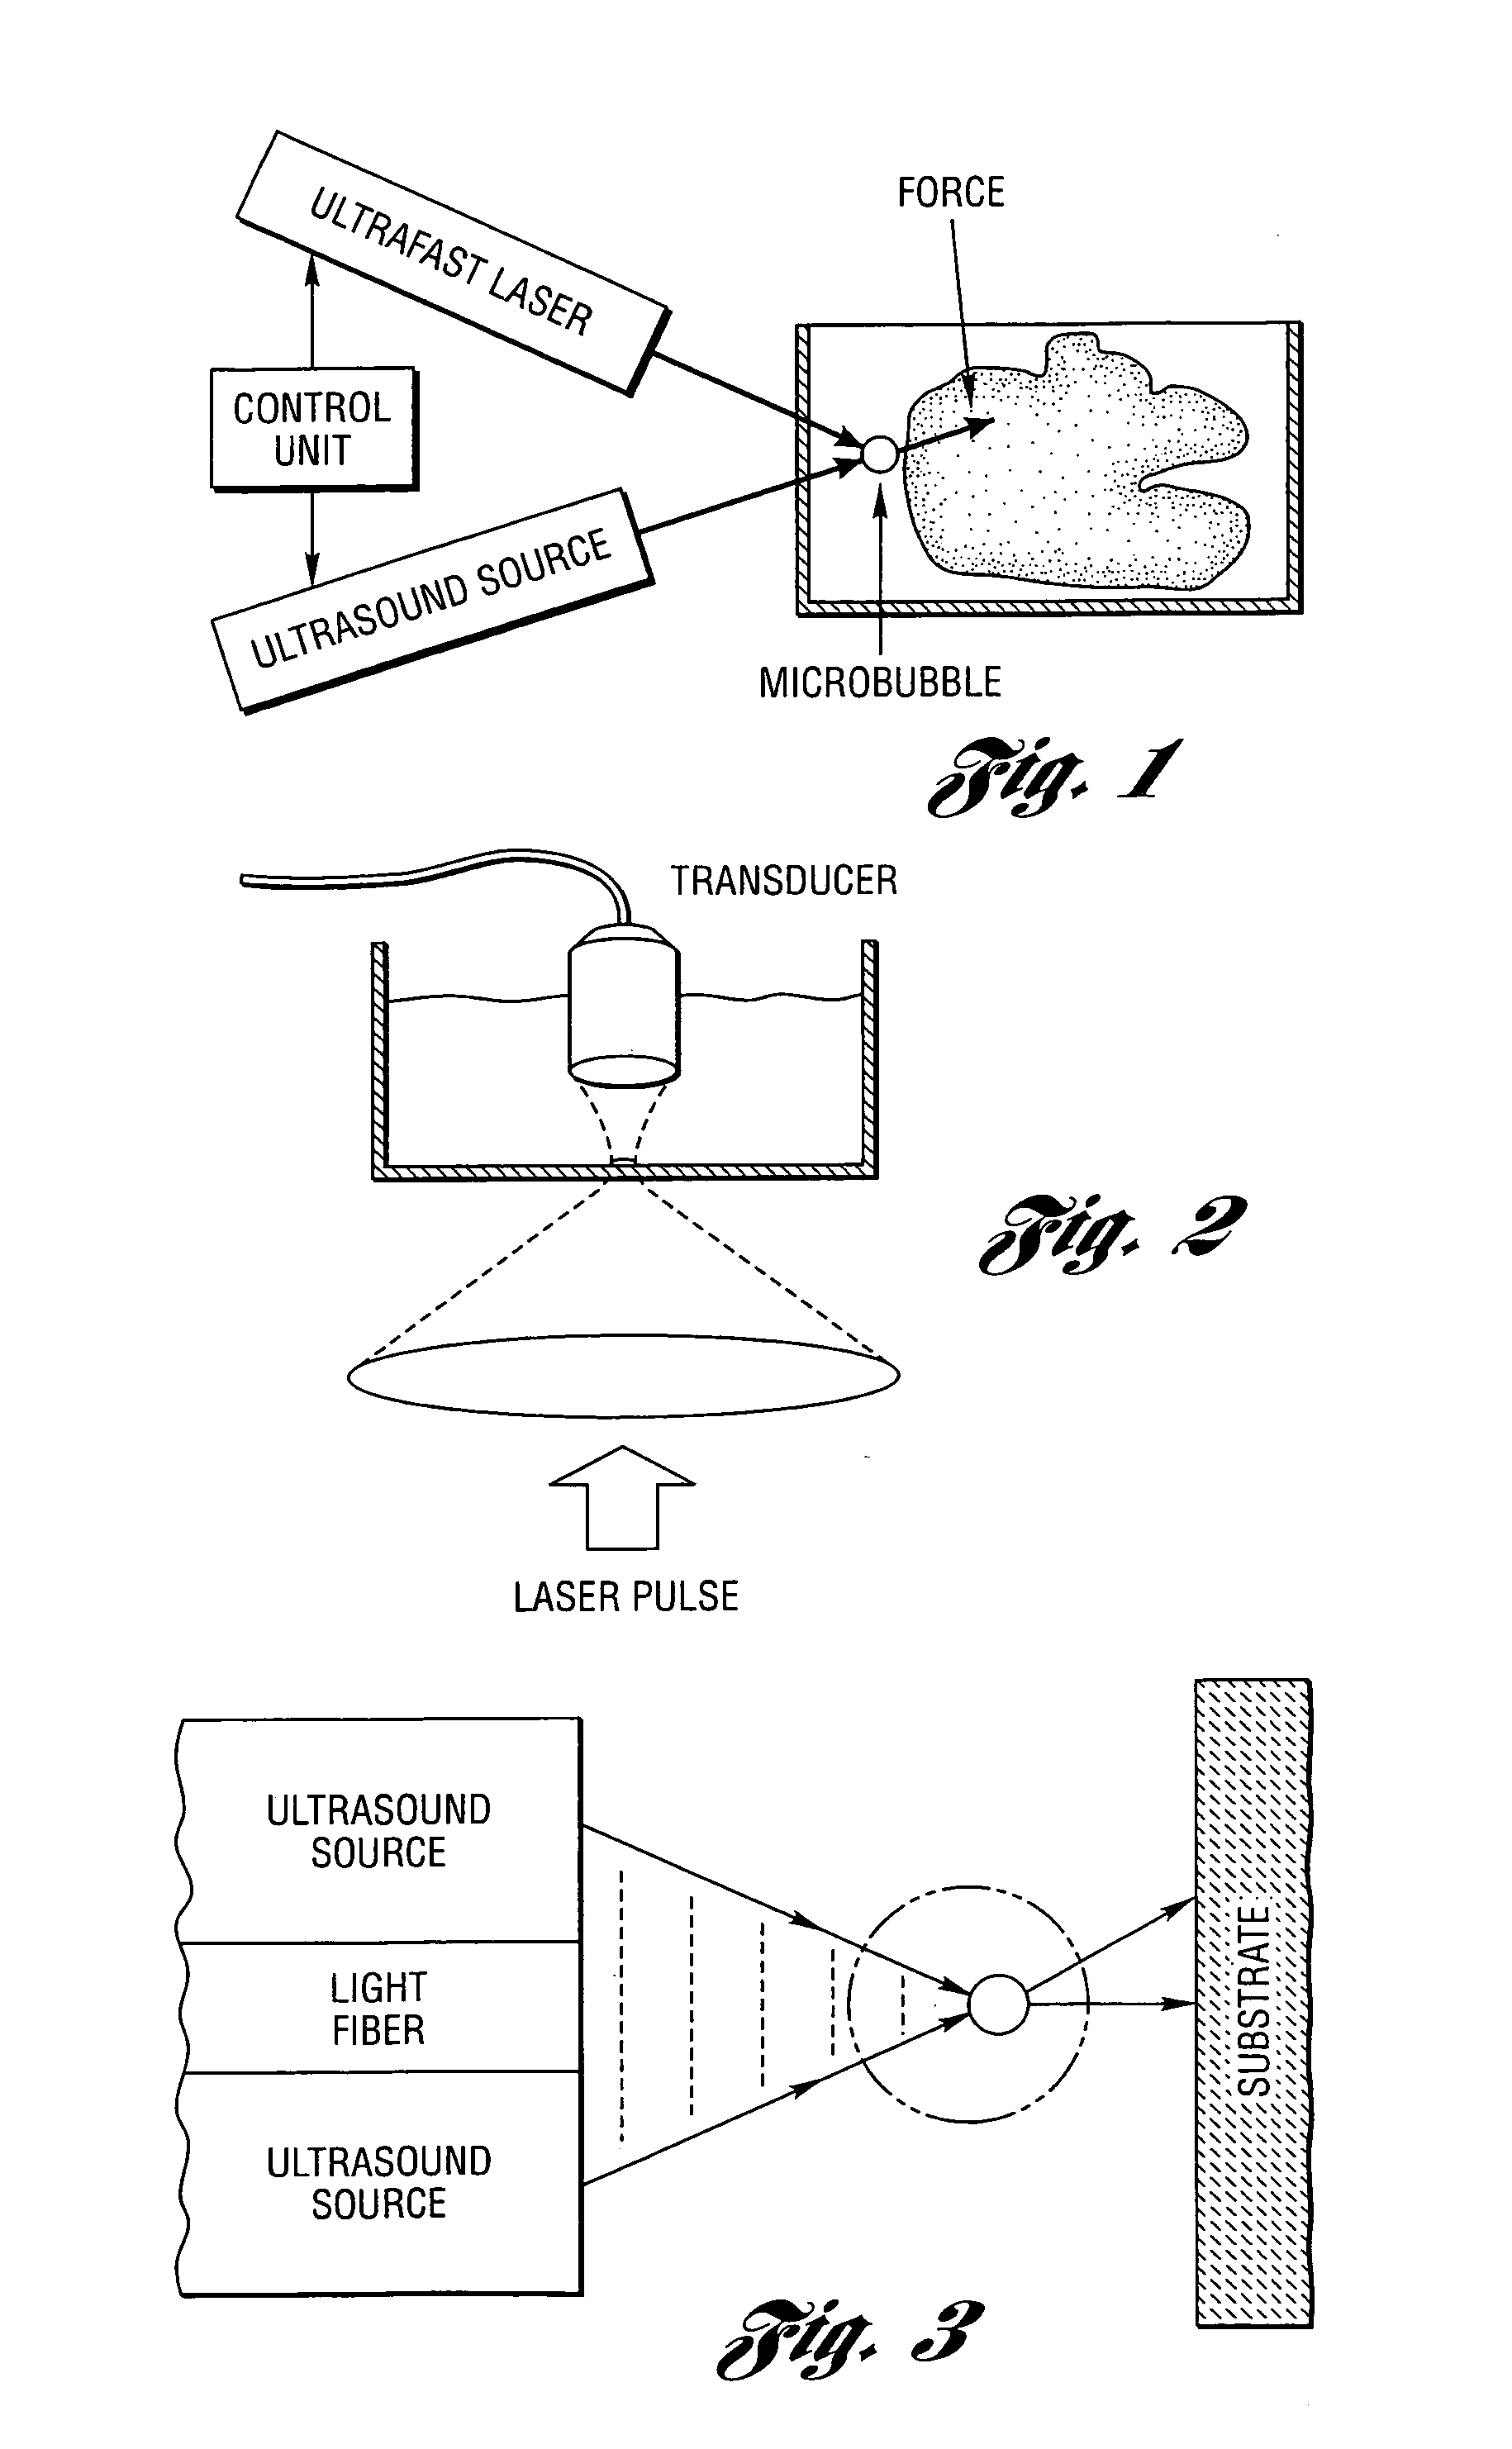 Method and system to create and acoustically manipulate a microbubble